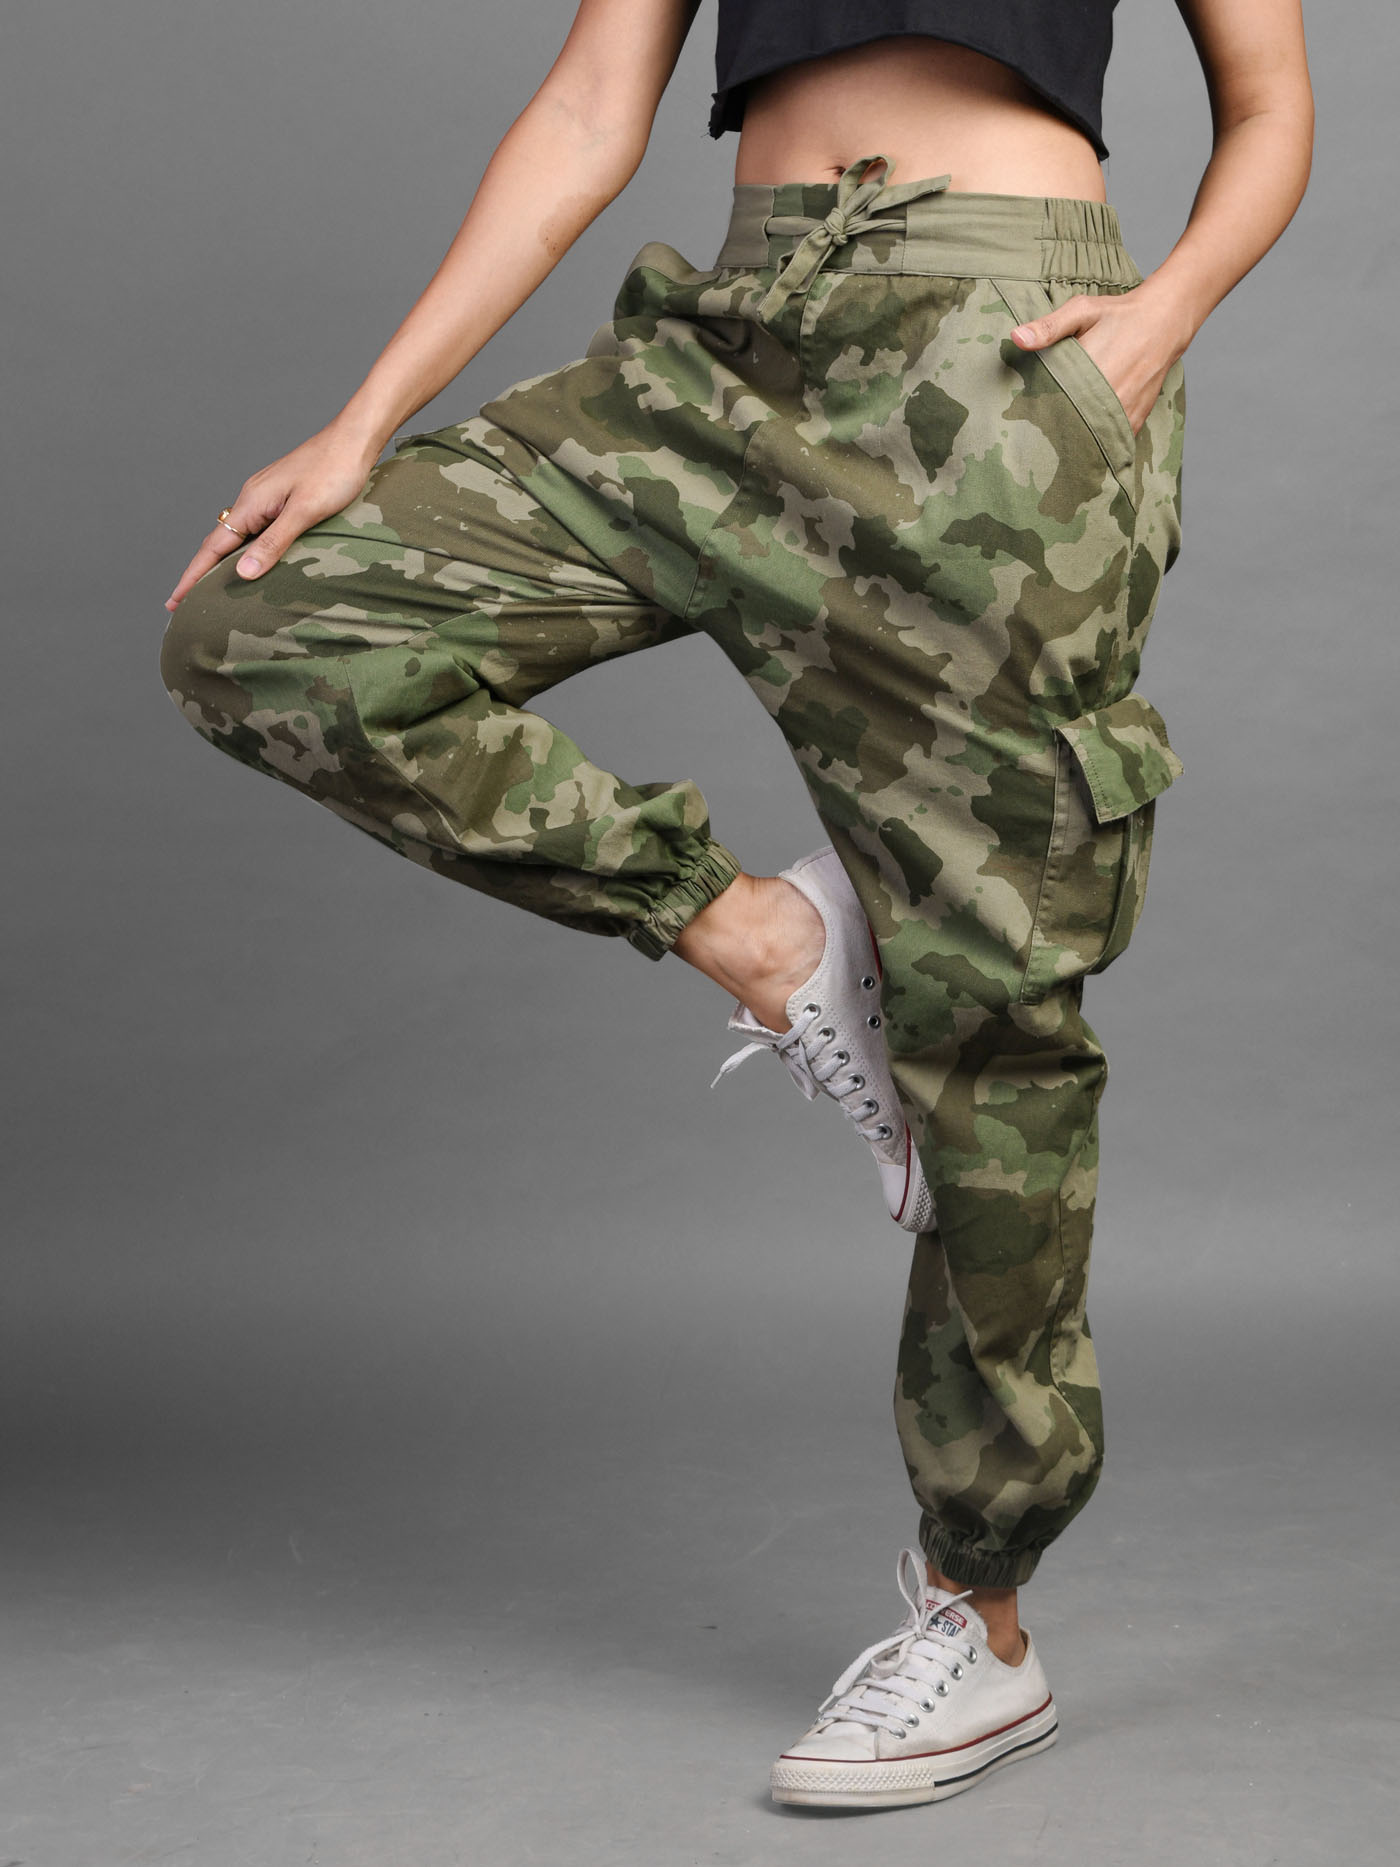 Buy Wholesale - Army Print Dori Style Relaxed Fit Zipper Cargo Pants